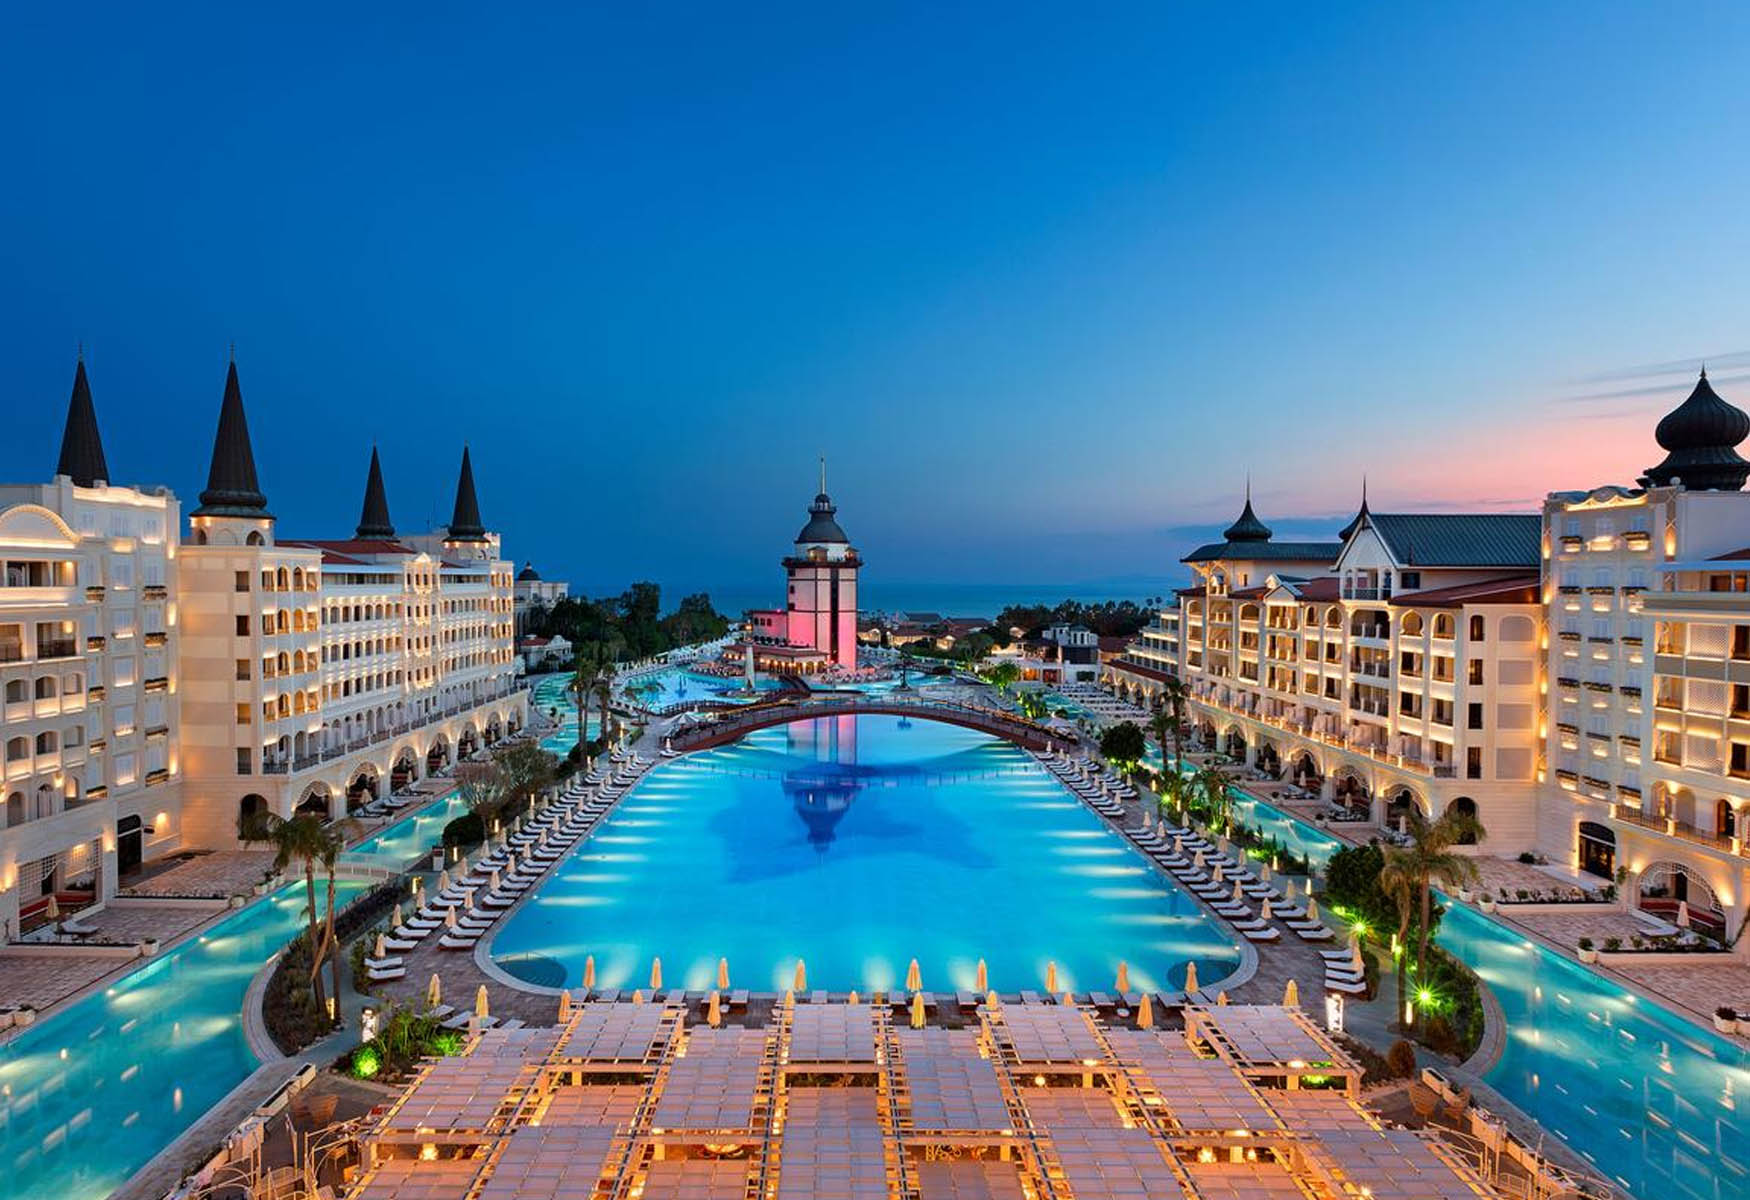 Where To Stay In Antalya: The BEST Areas